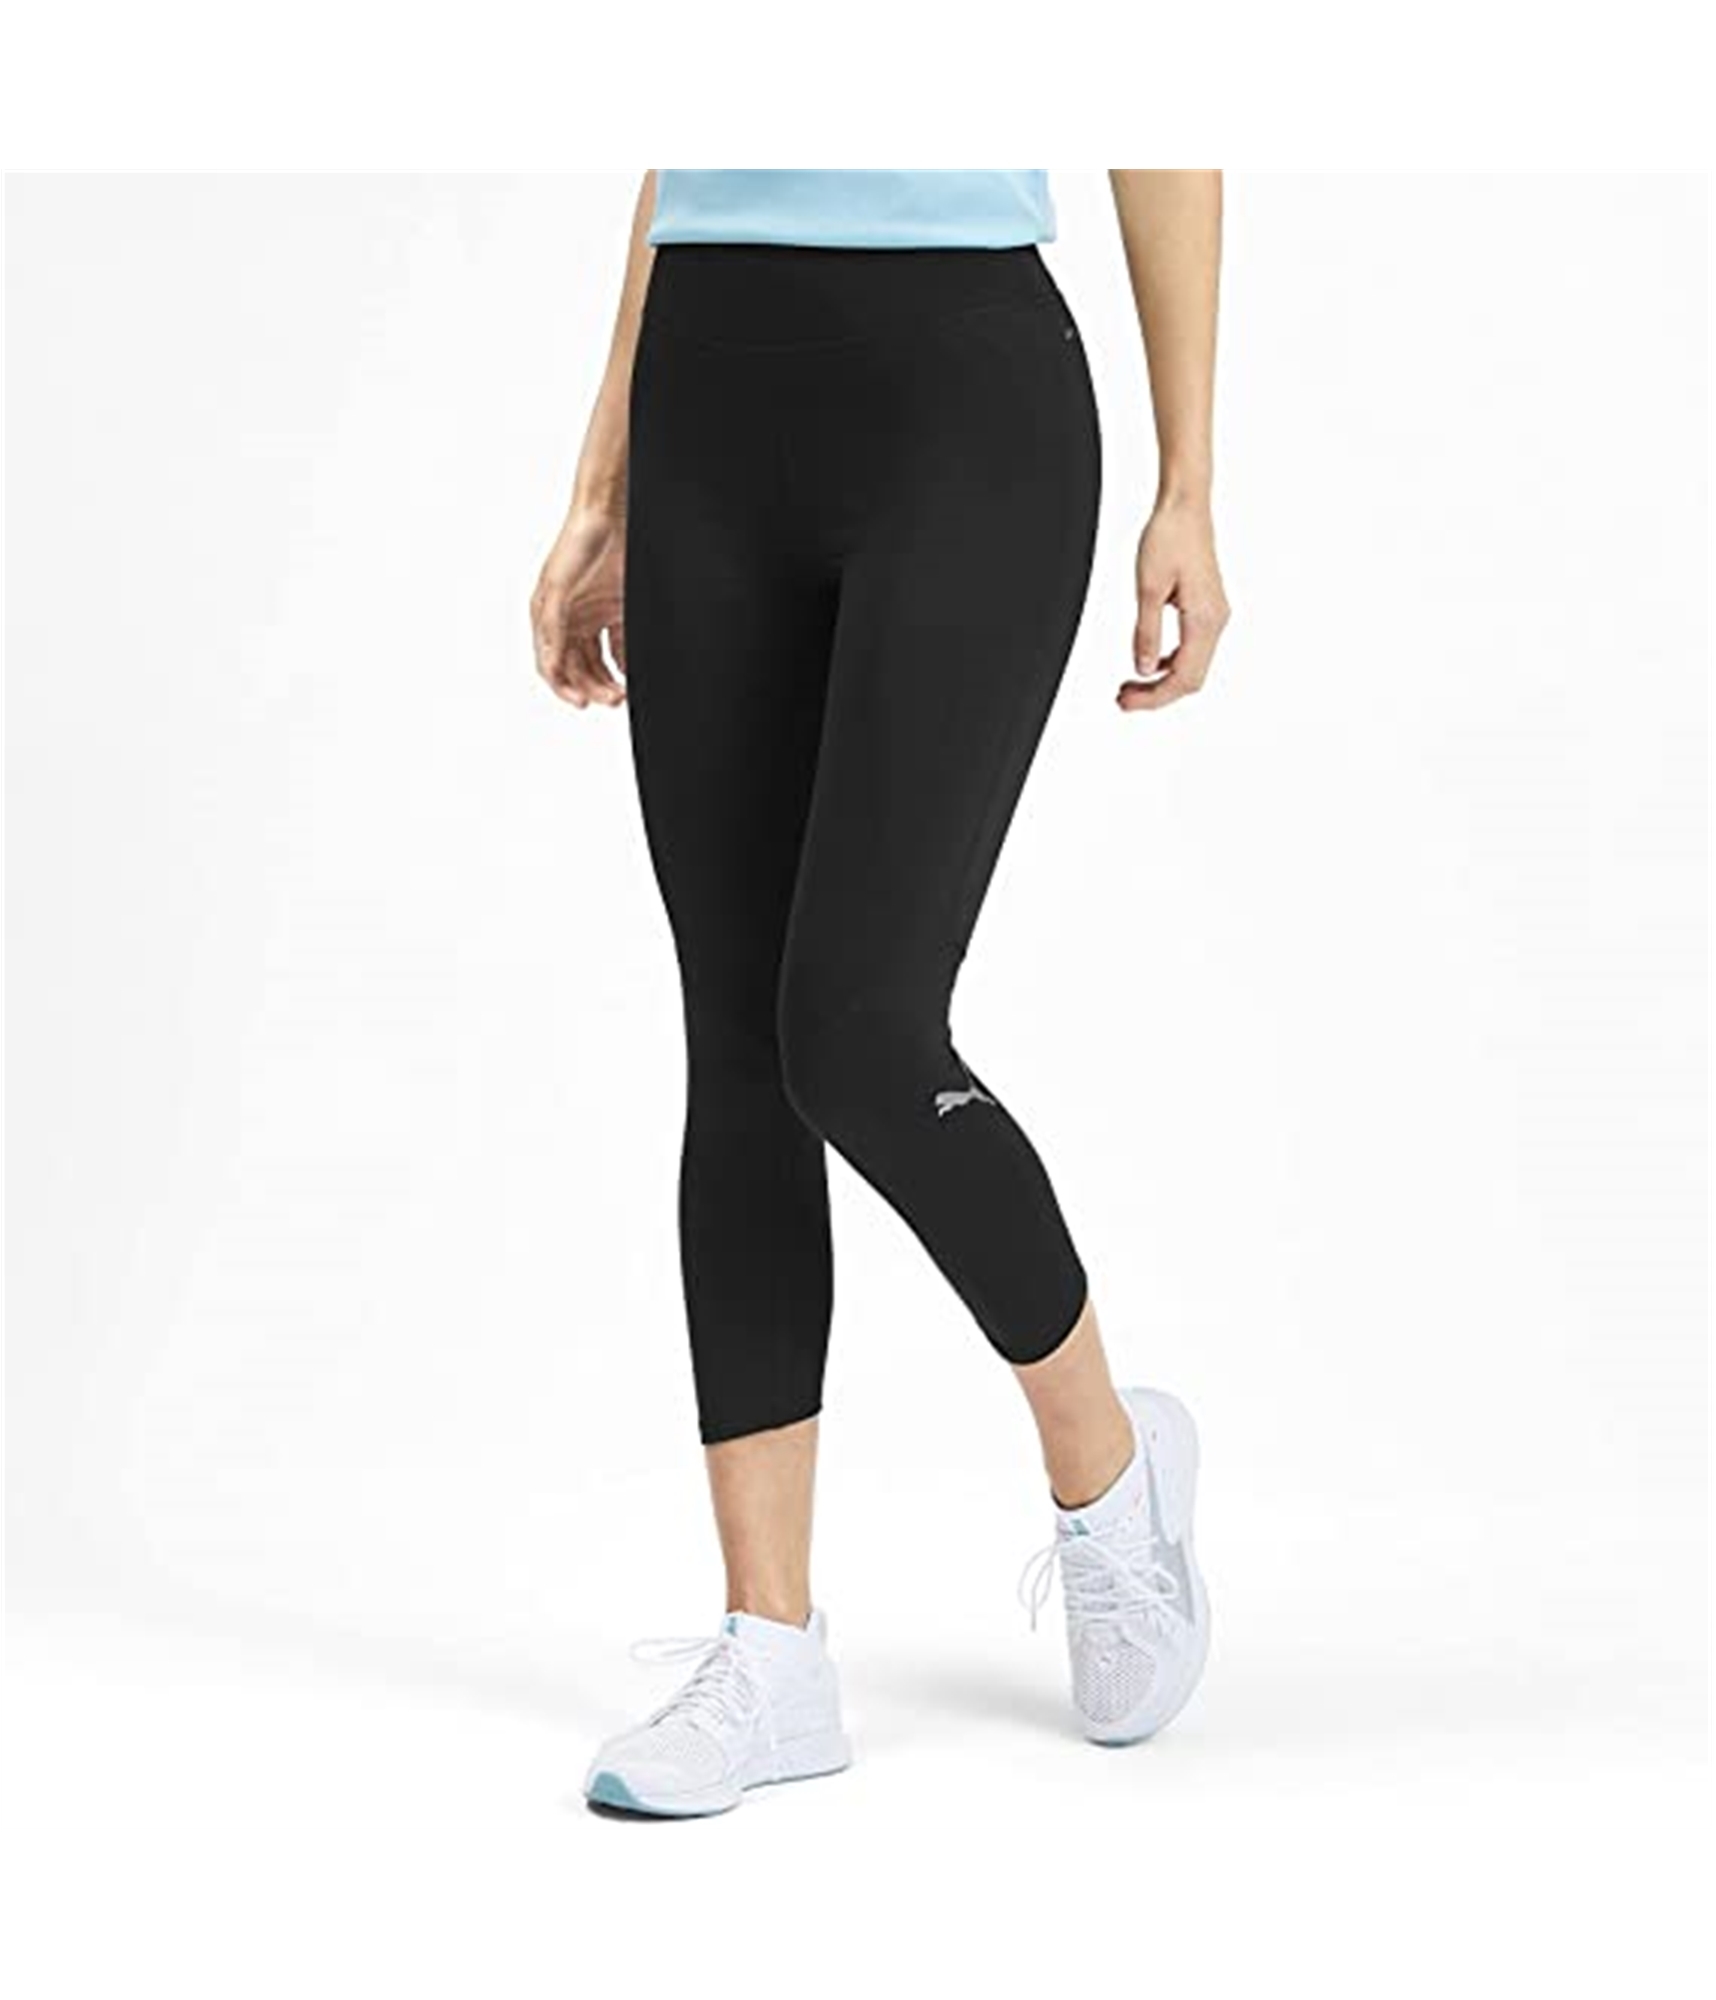 Buy a Puma Womens Ignite 3/4 Tight Compression Athletic Pants